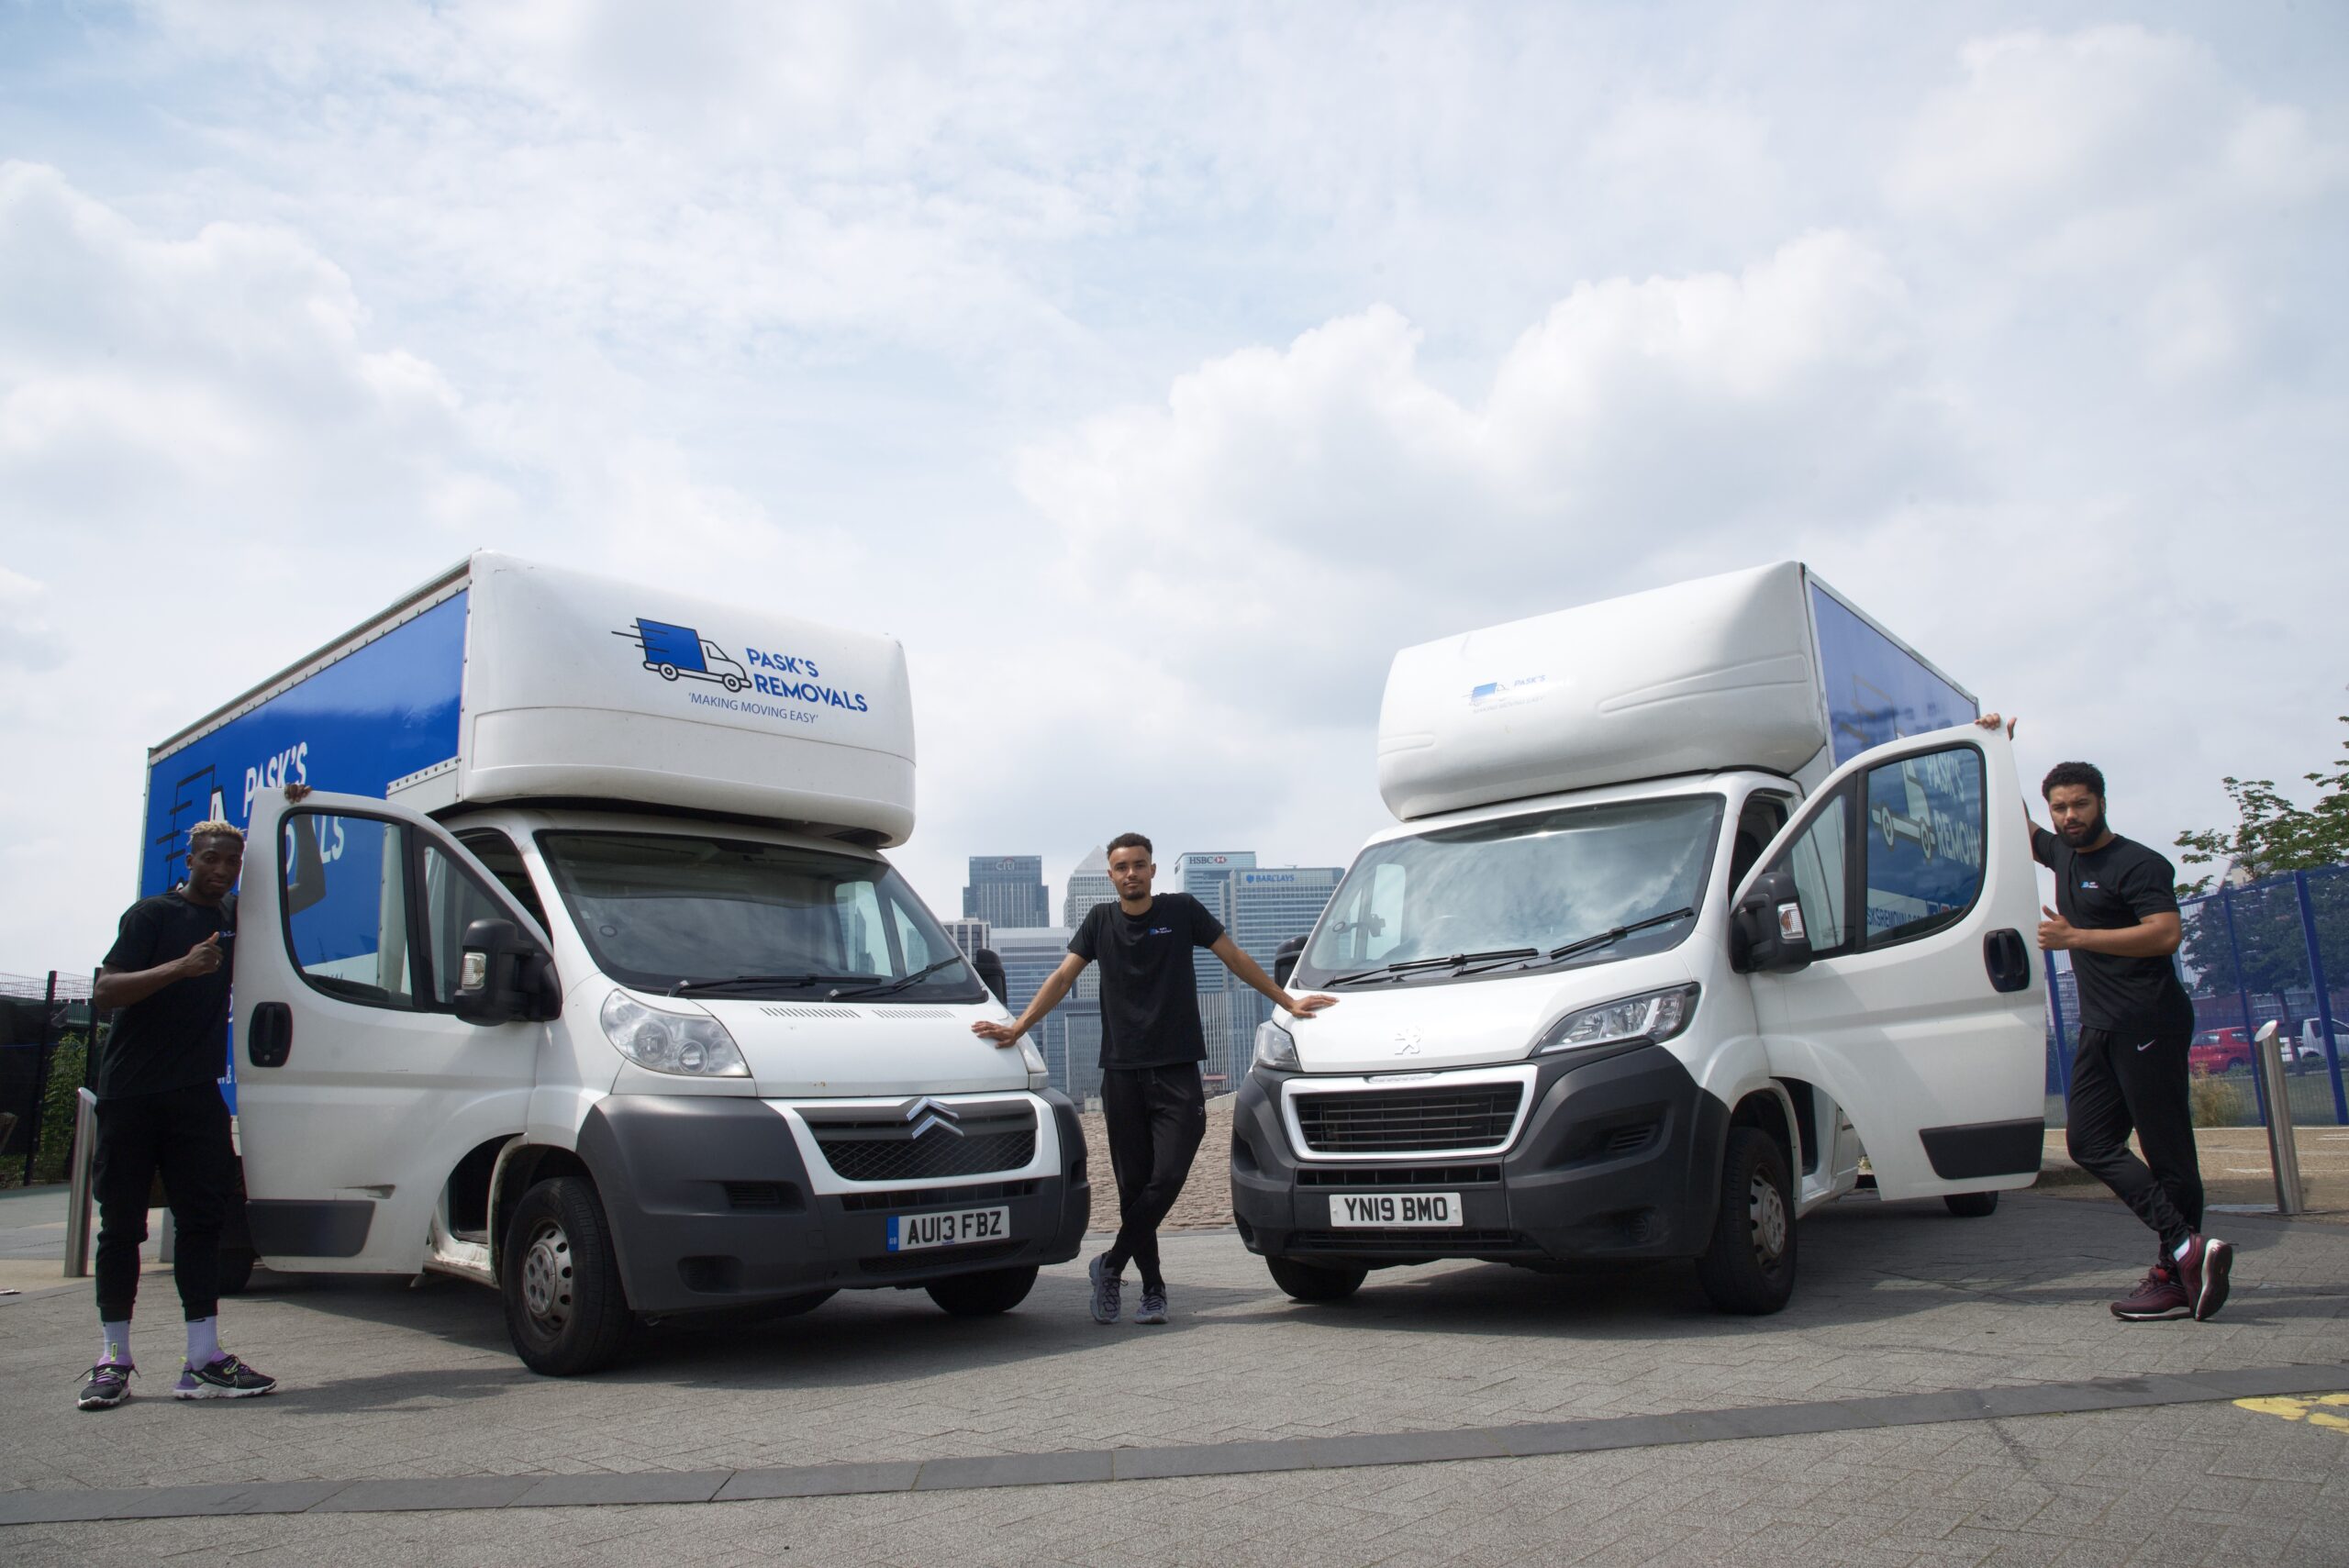 Pask's Removals Local Movers in London